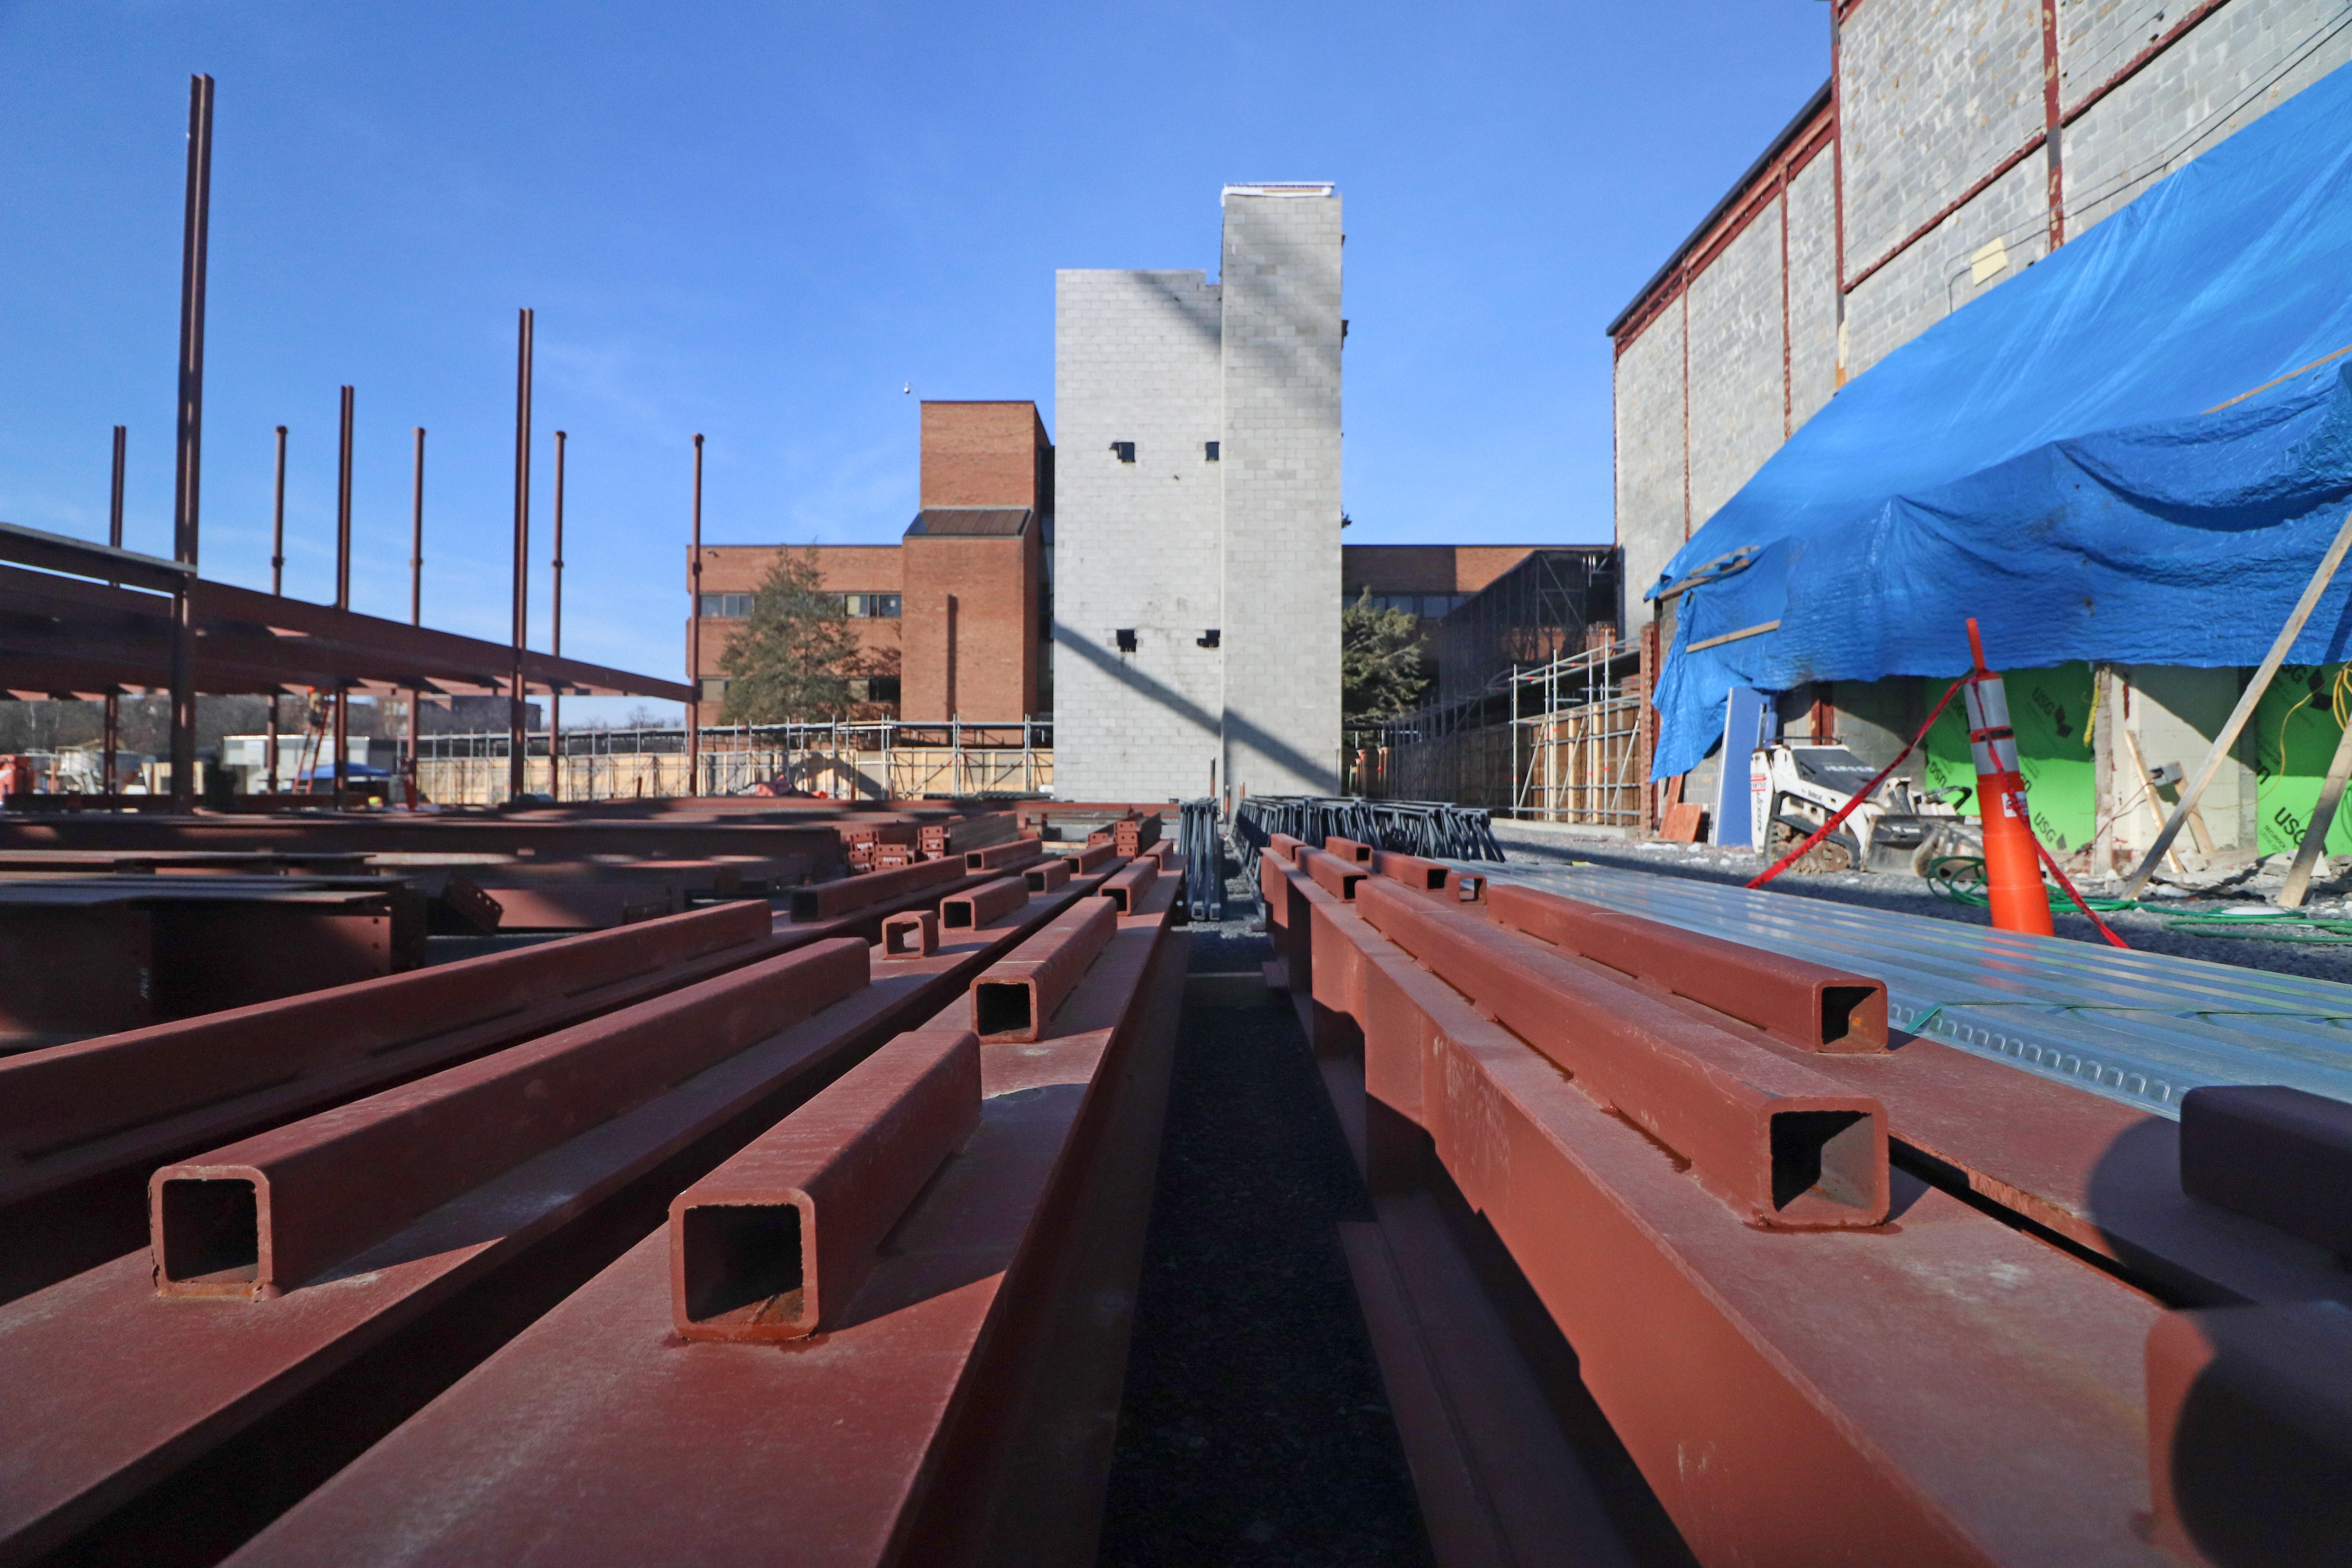 A view of the existing Albany High building as seen from the construction site, with the concrete stairwell of the new building visible among a stack of beams.